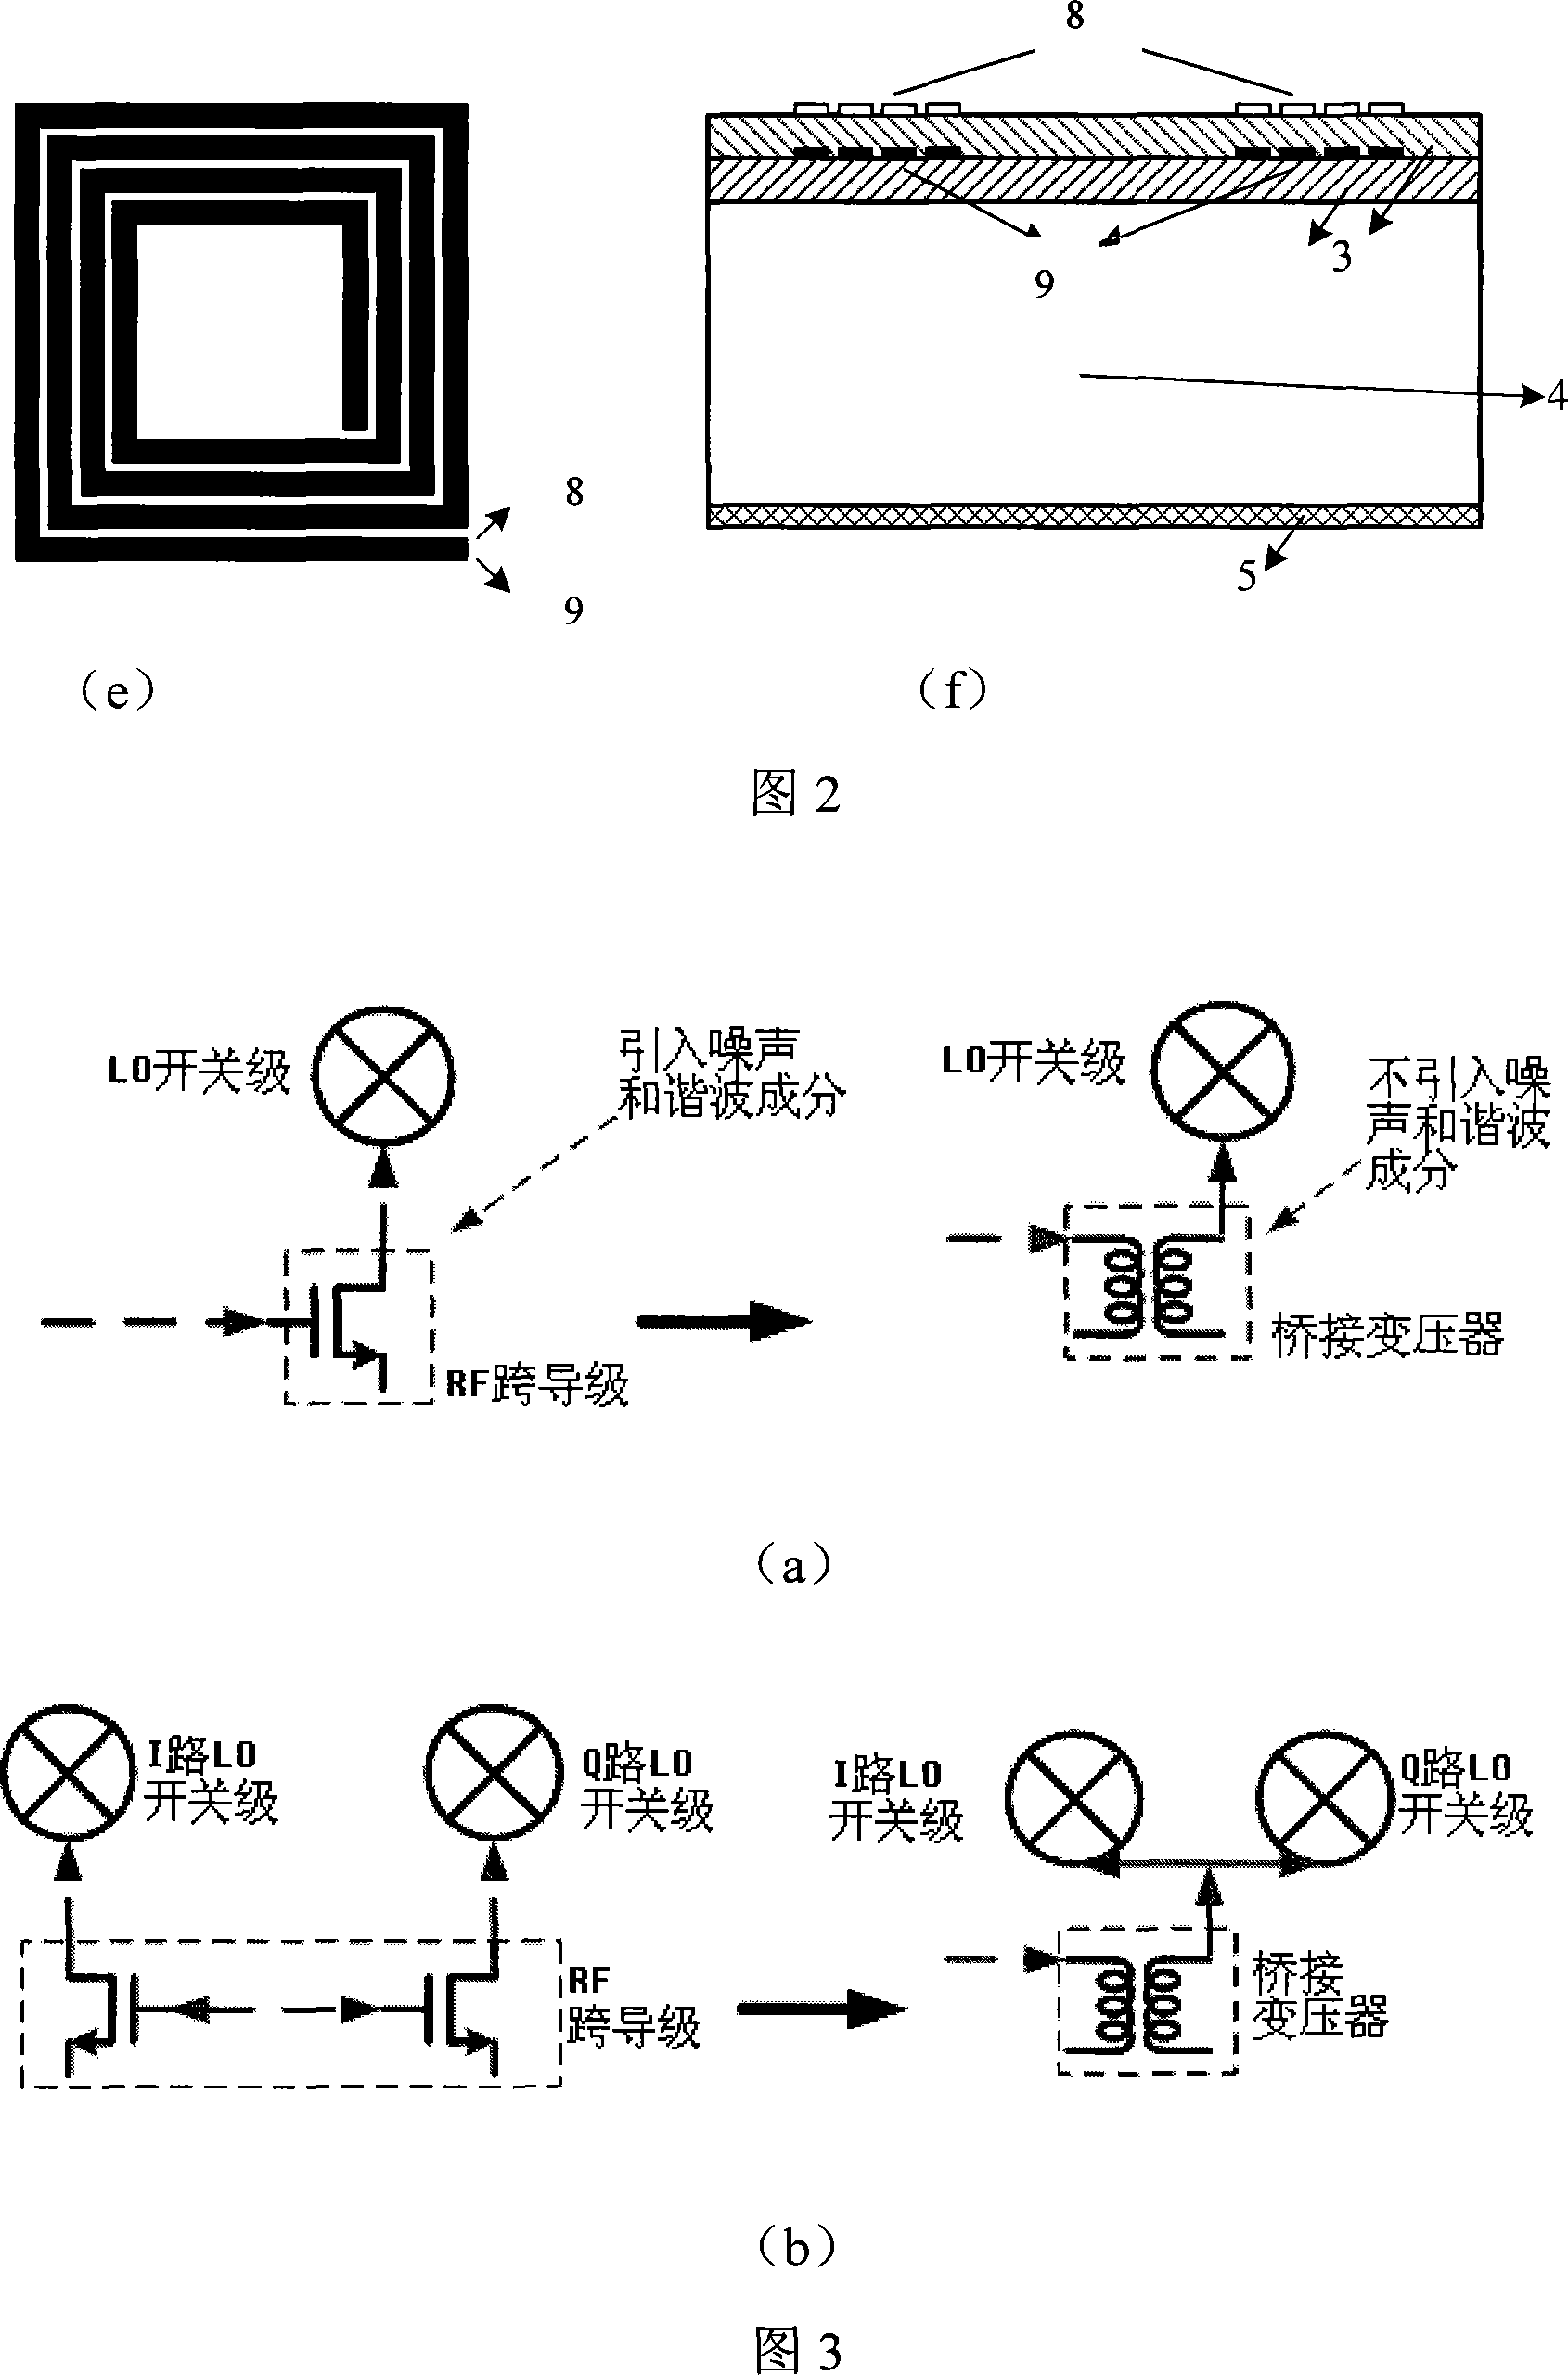 Frequency mixer with low-power consumption and high performance in quadrature